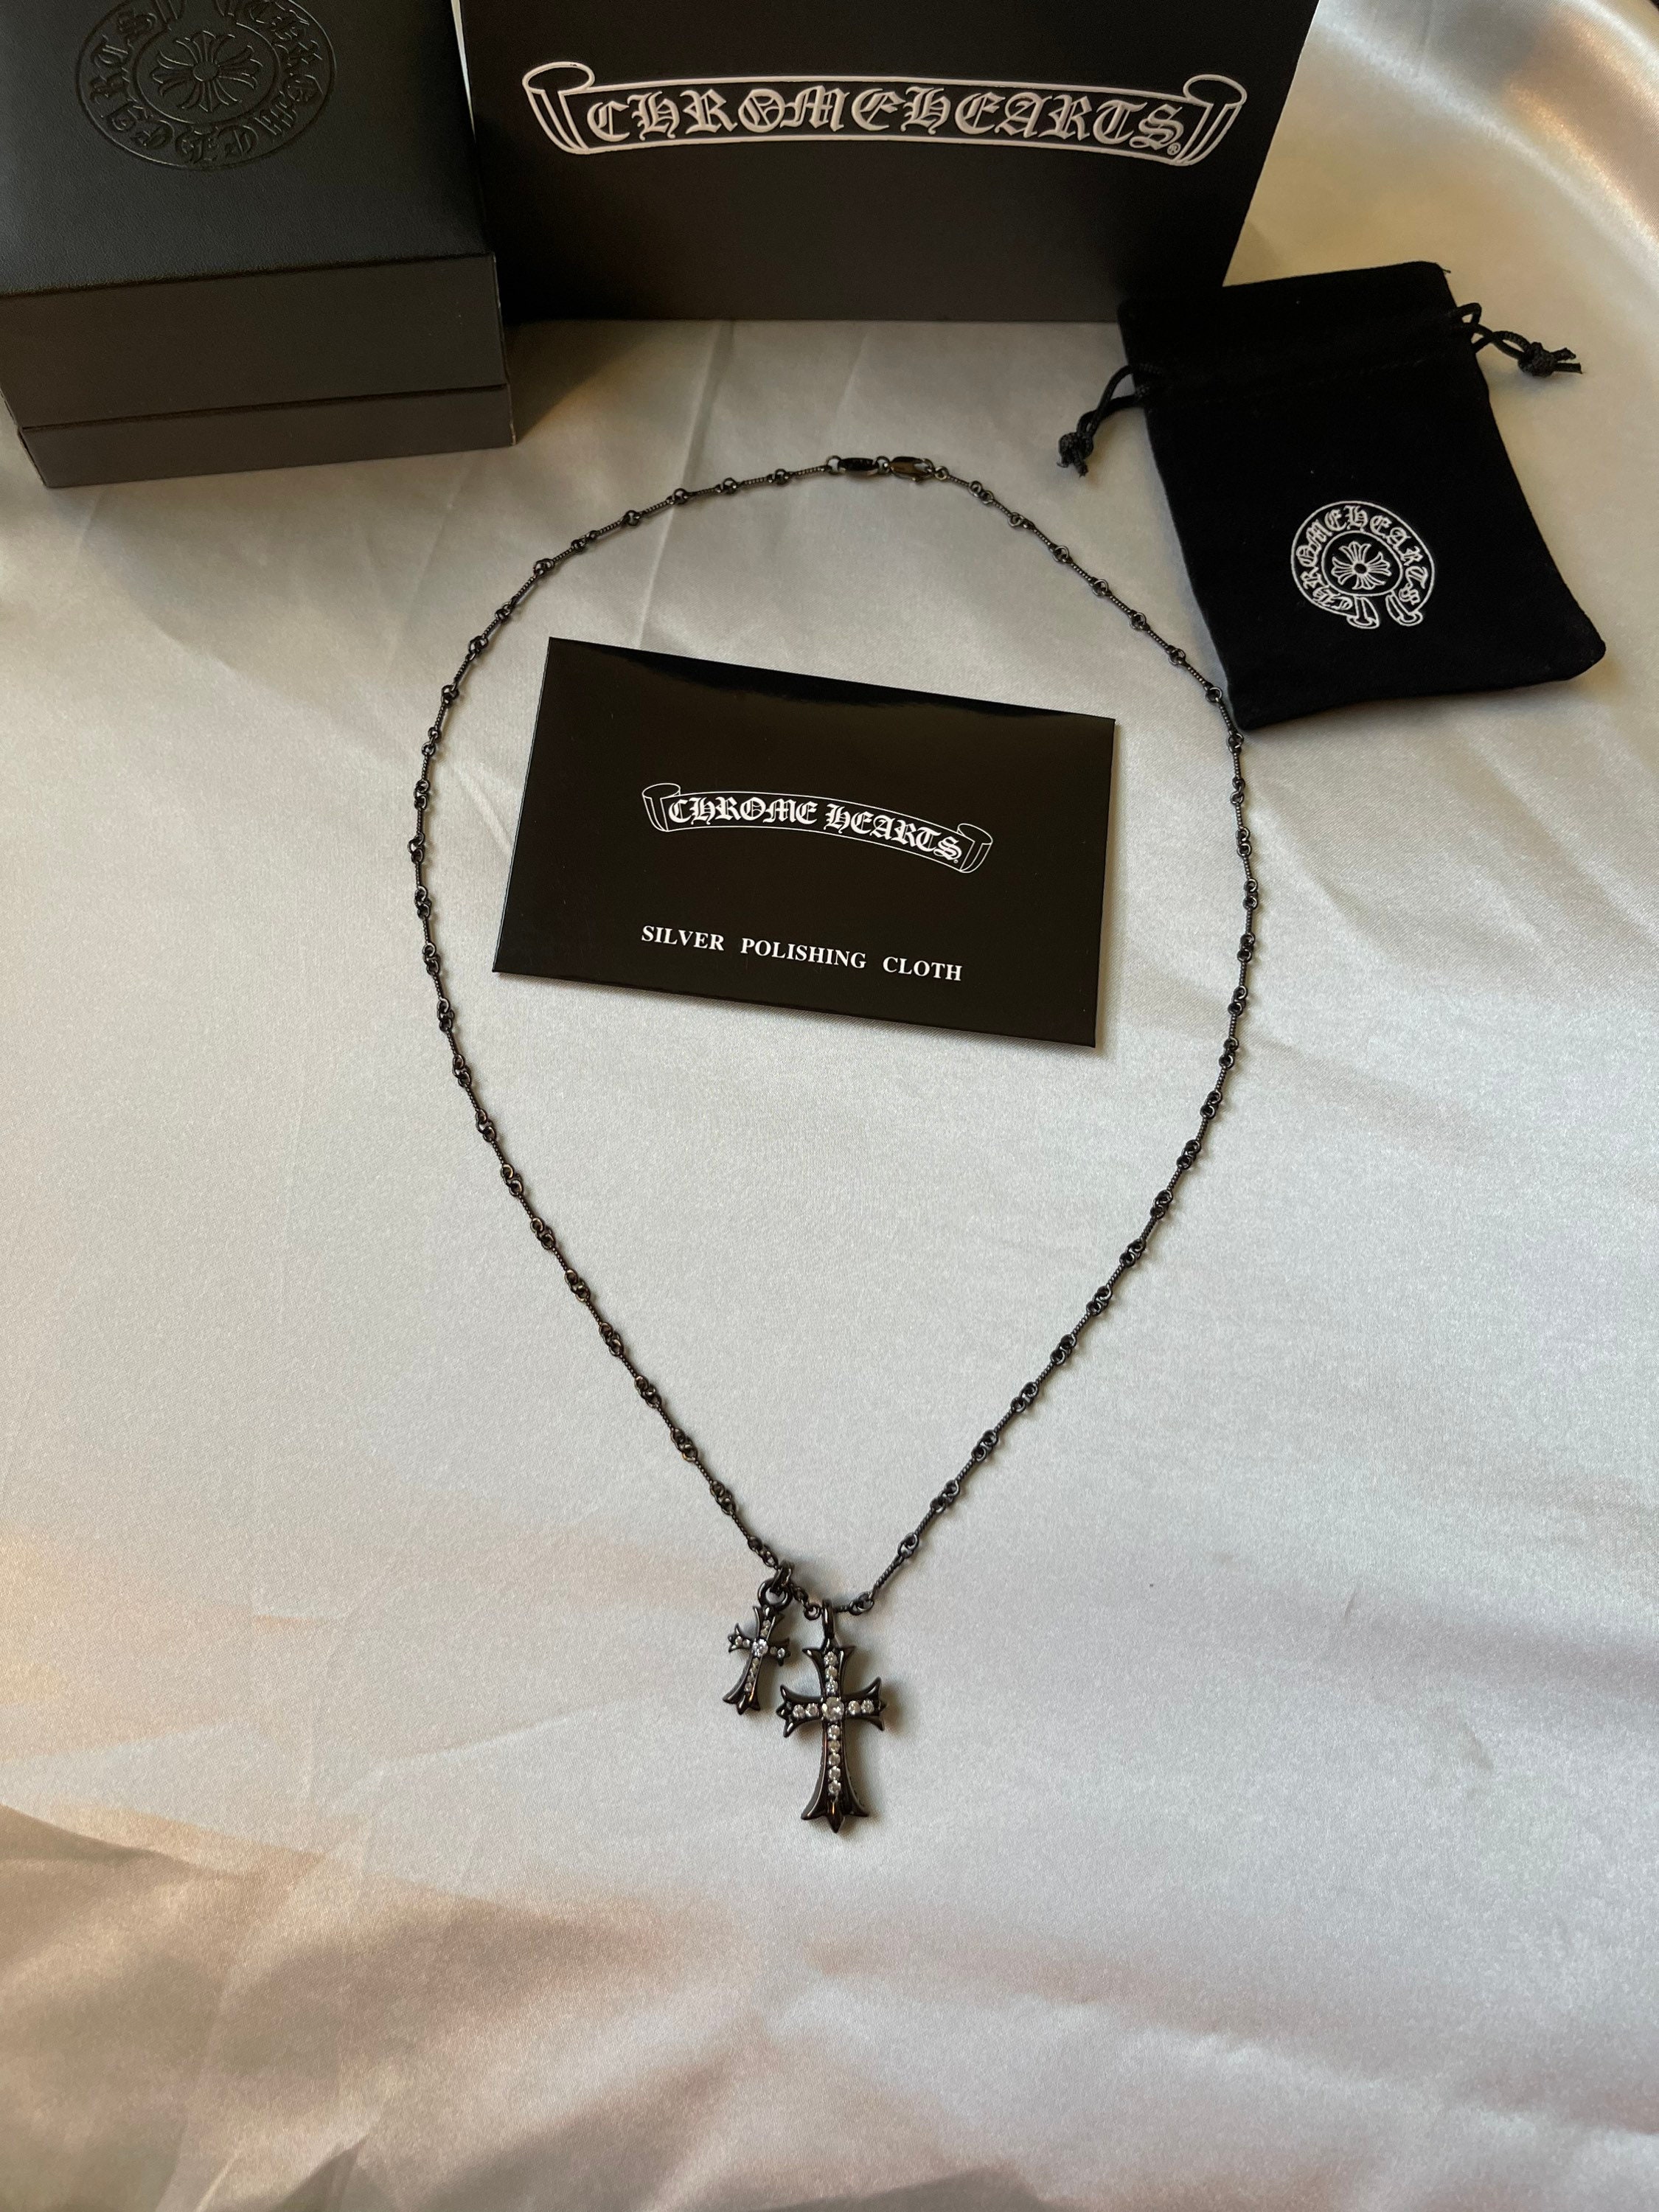 Chrome Hearts Style Necklace Pendant Vintage Y2K Stainless Steel | eBay